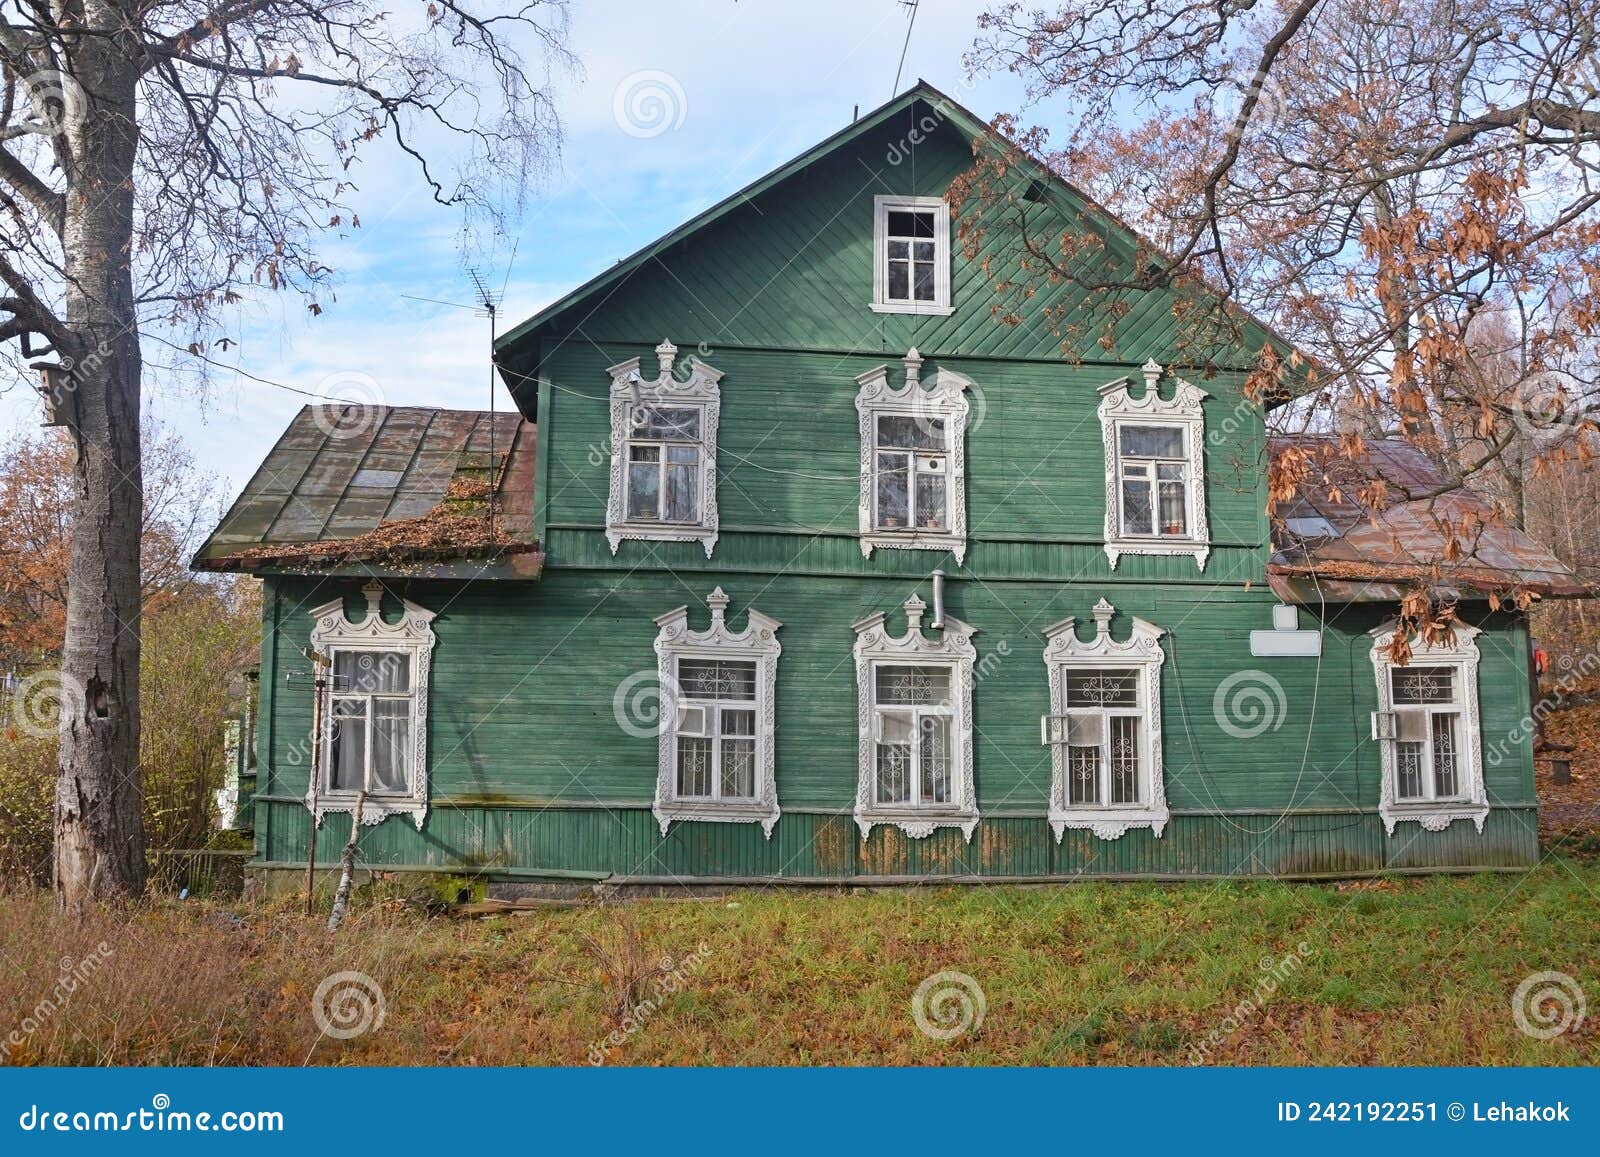 Old and Abandoned Wooden House in Zelenogorsk, Russia. Falling Apart